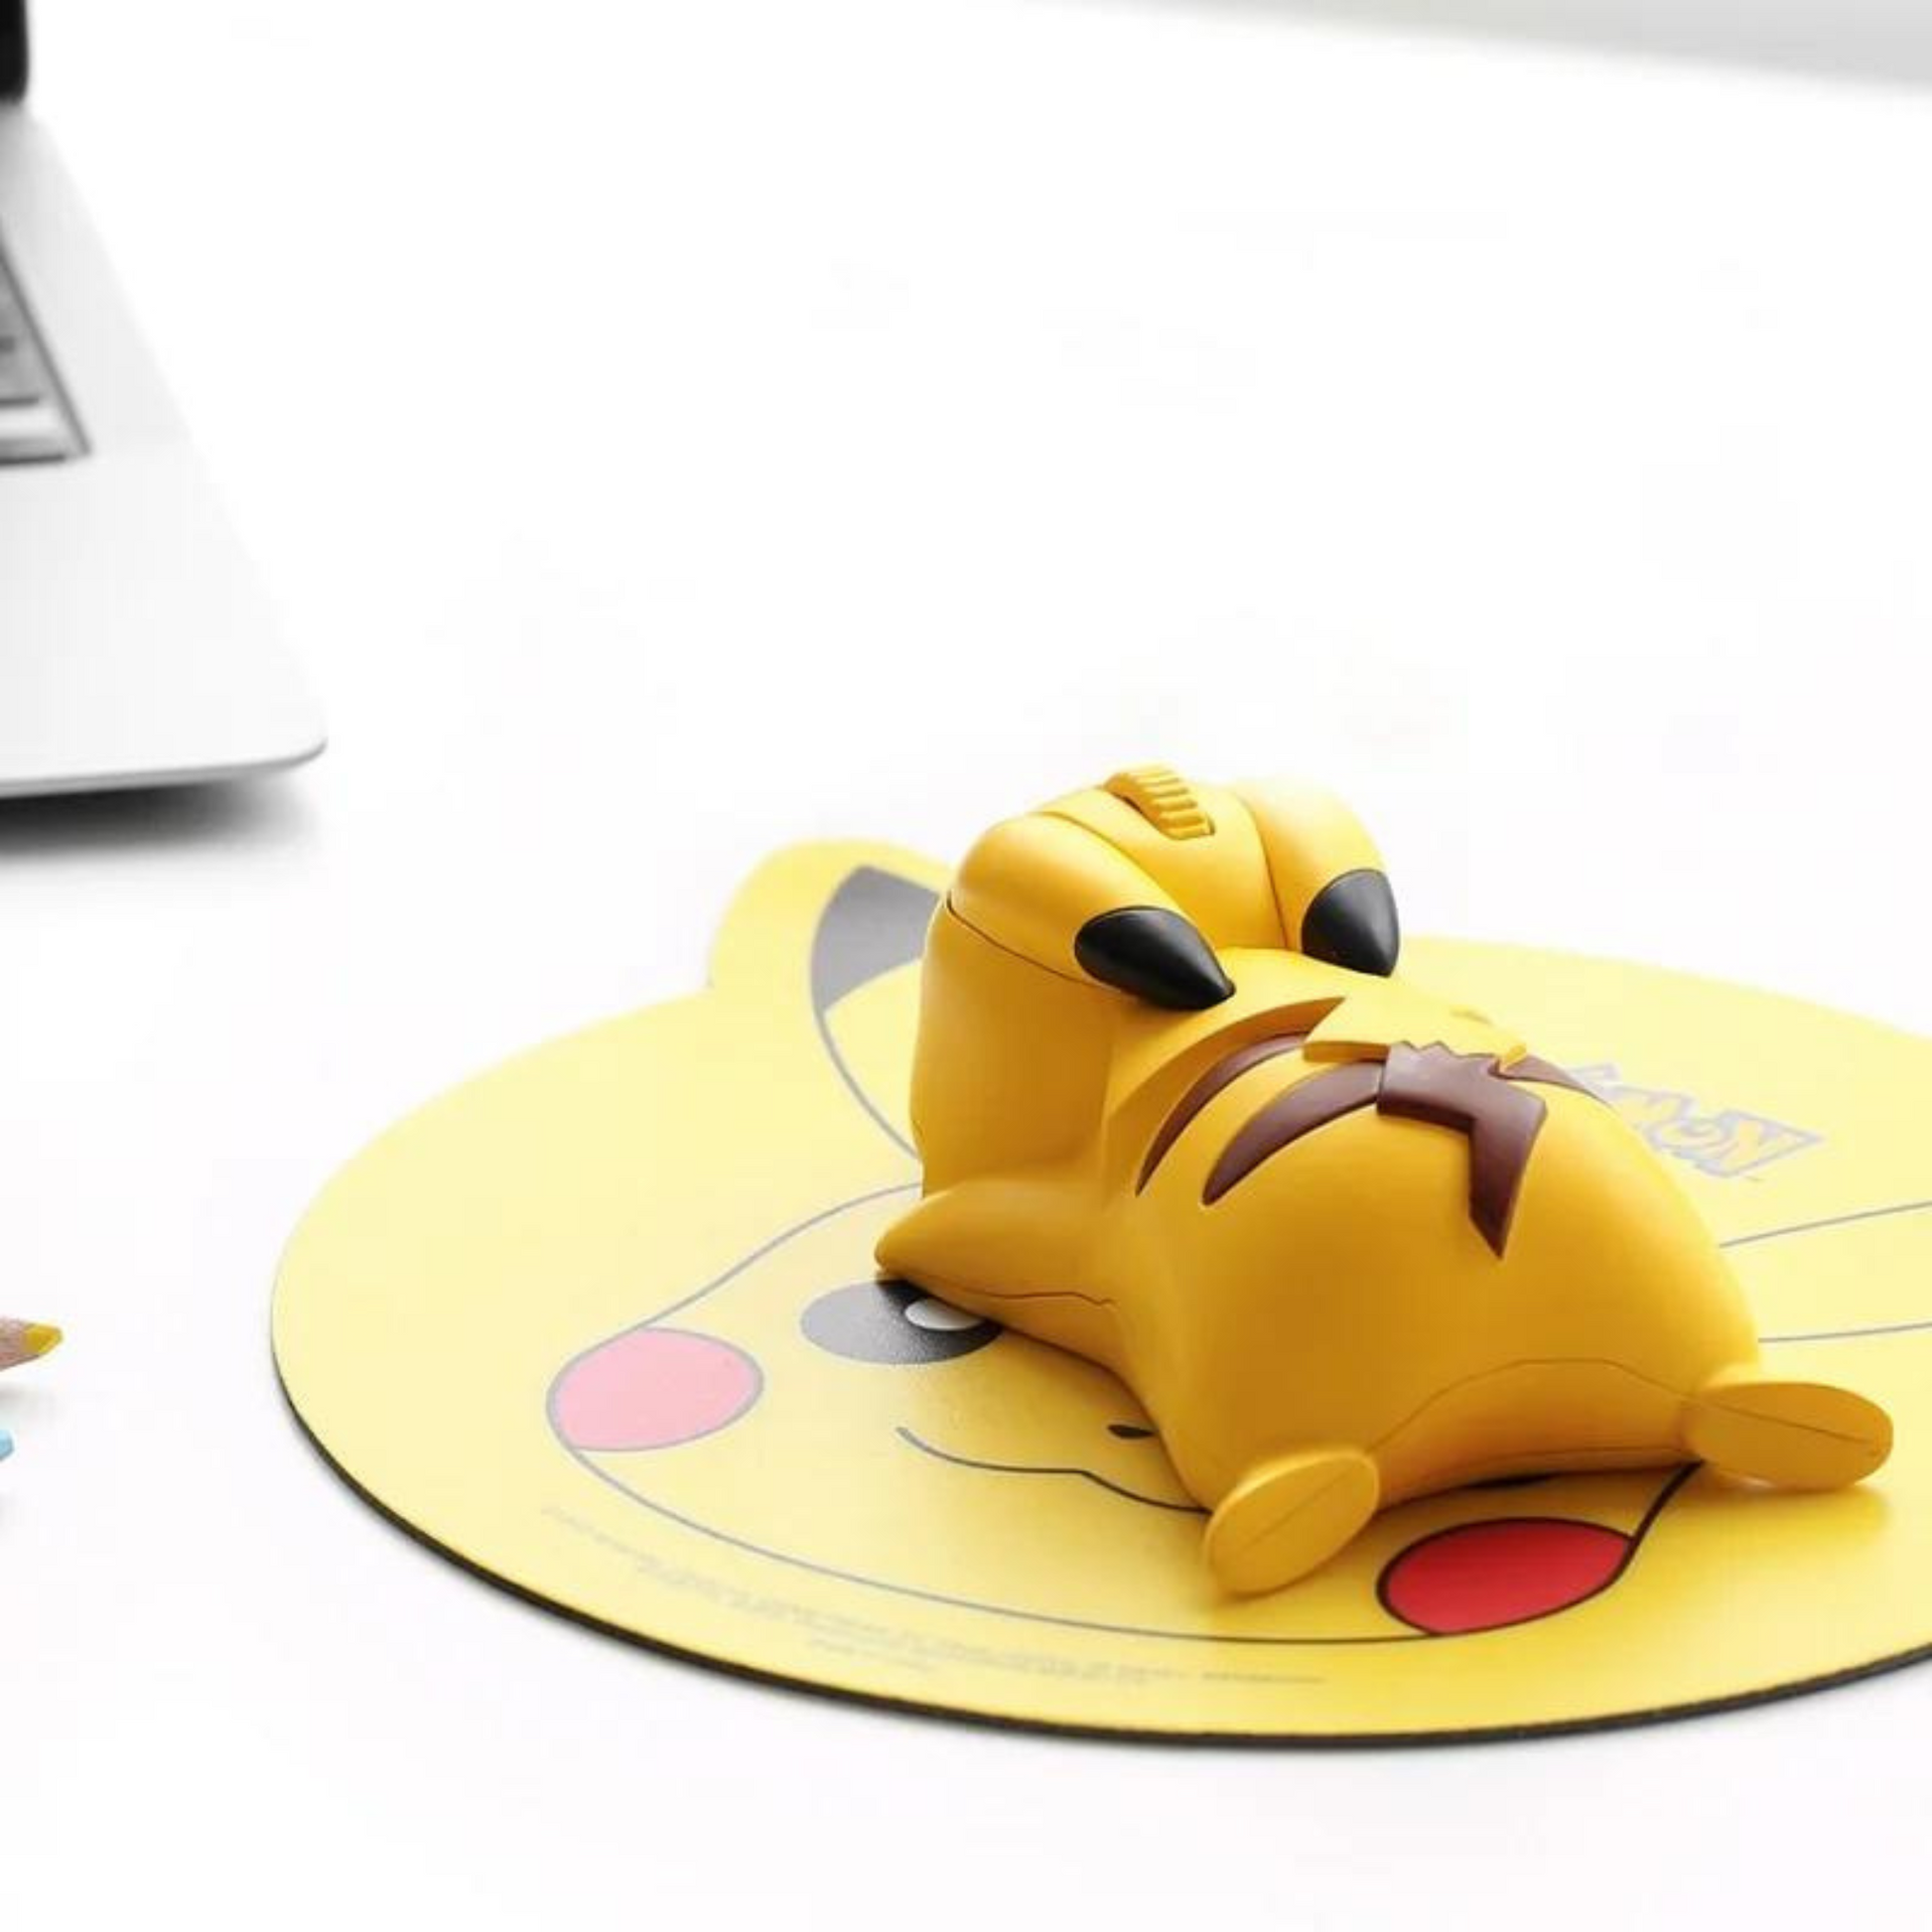 Rear sleeping - Pikachu Pokémon mouse wireless bluetooth connection with official premium nintendo quality, perfect gift for pokemon fans